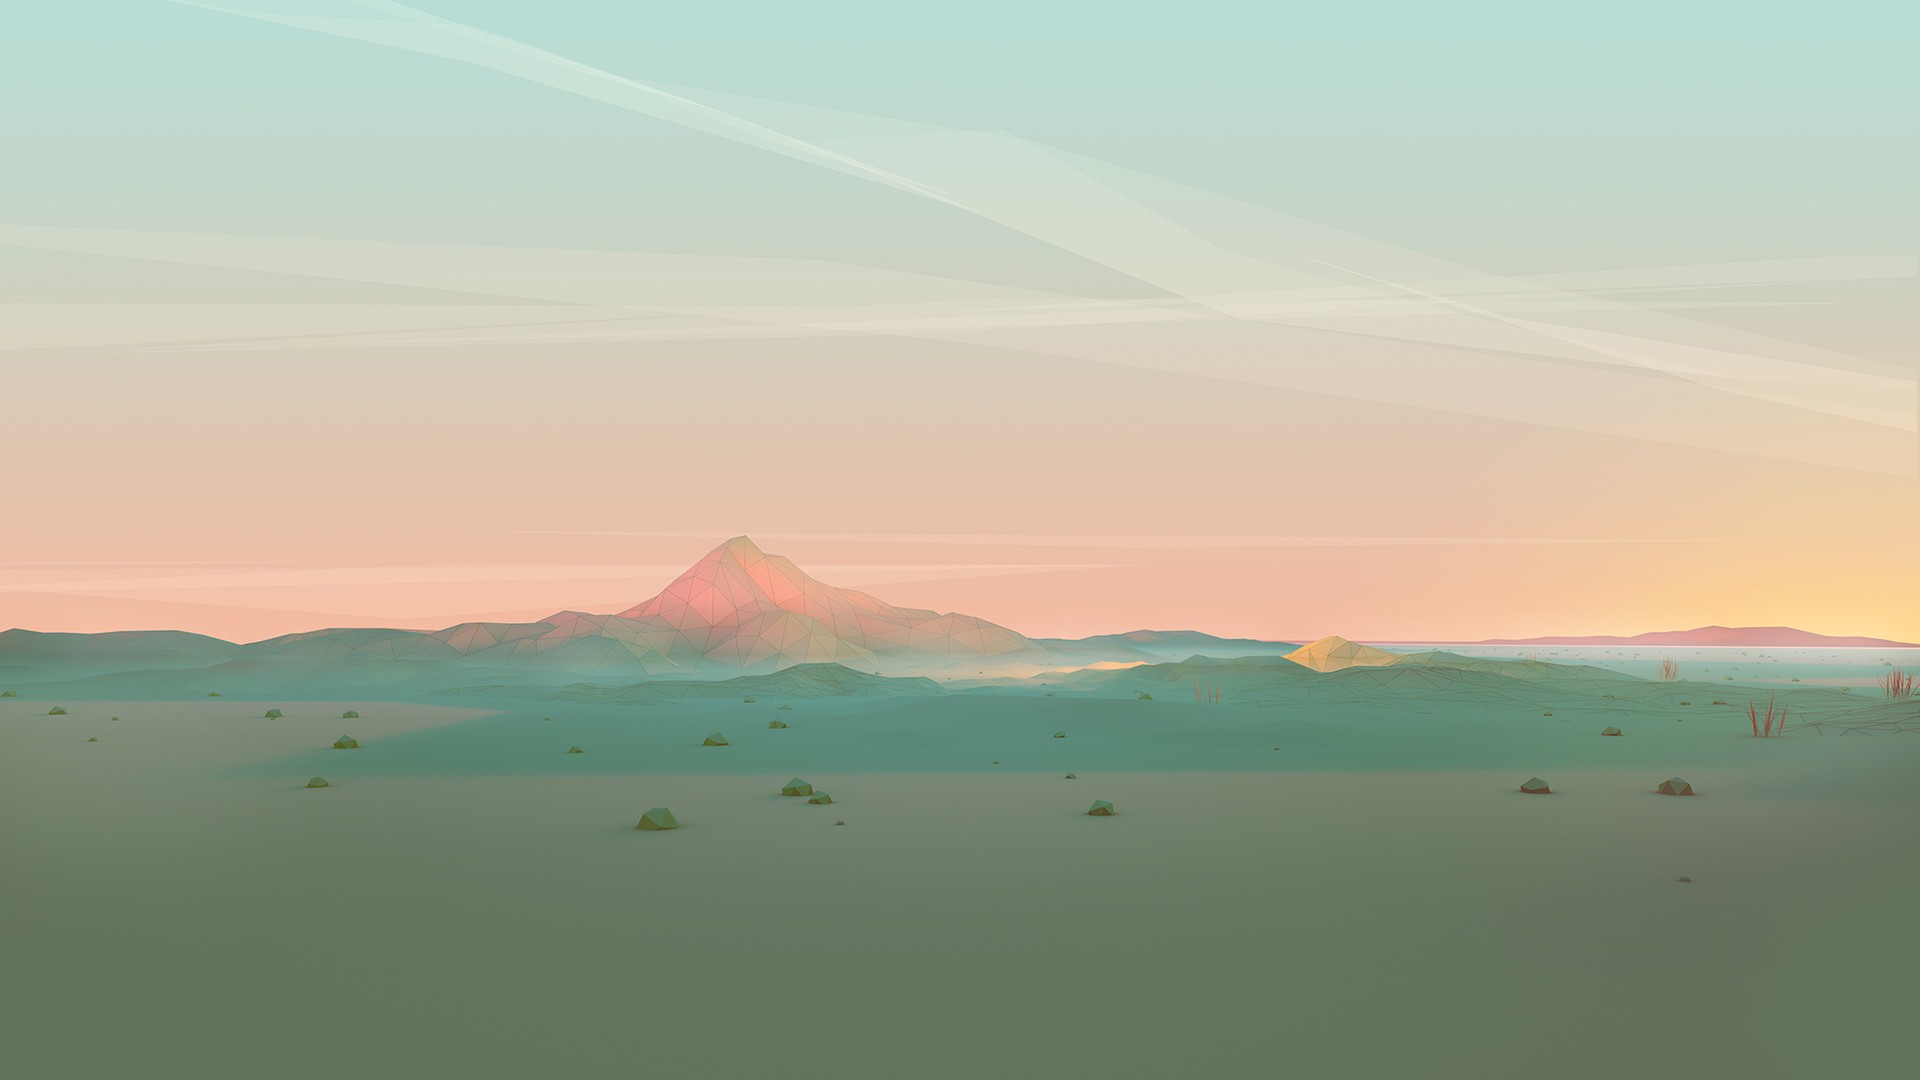 General 1920x1080 sunset mountains digital art low poly